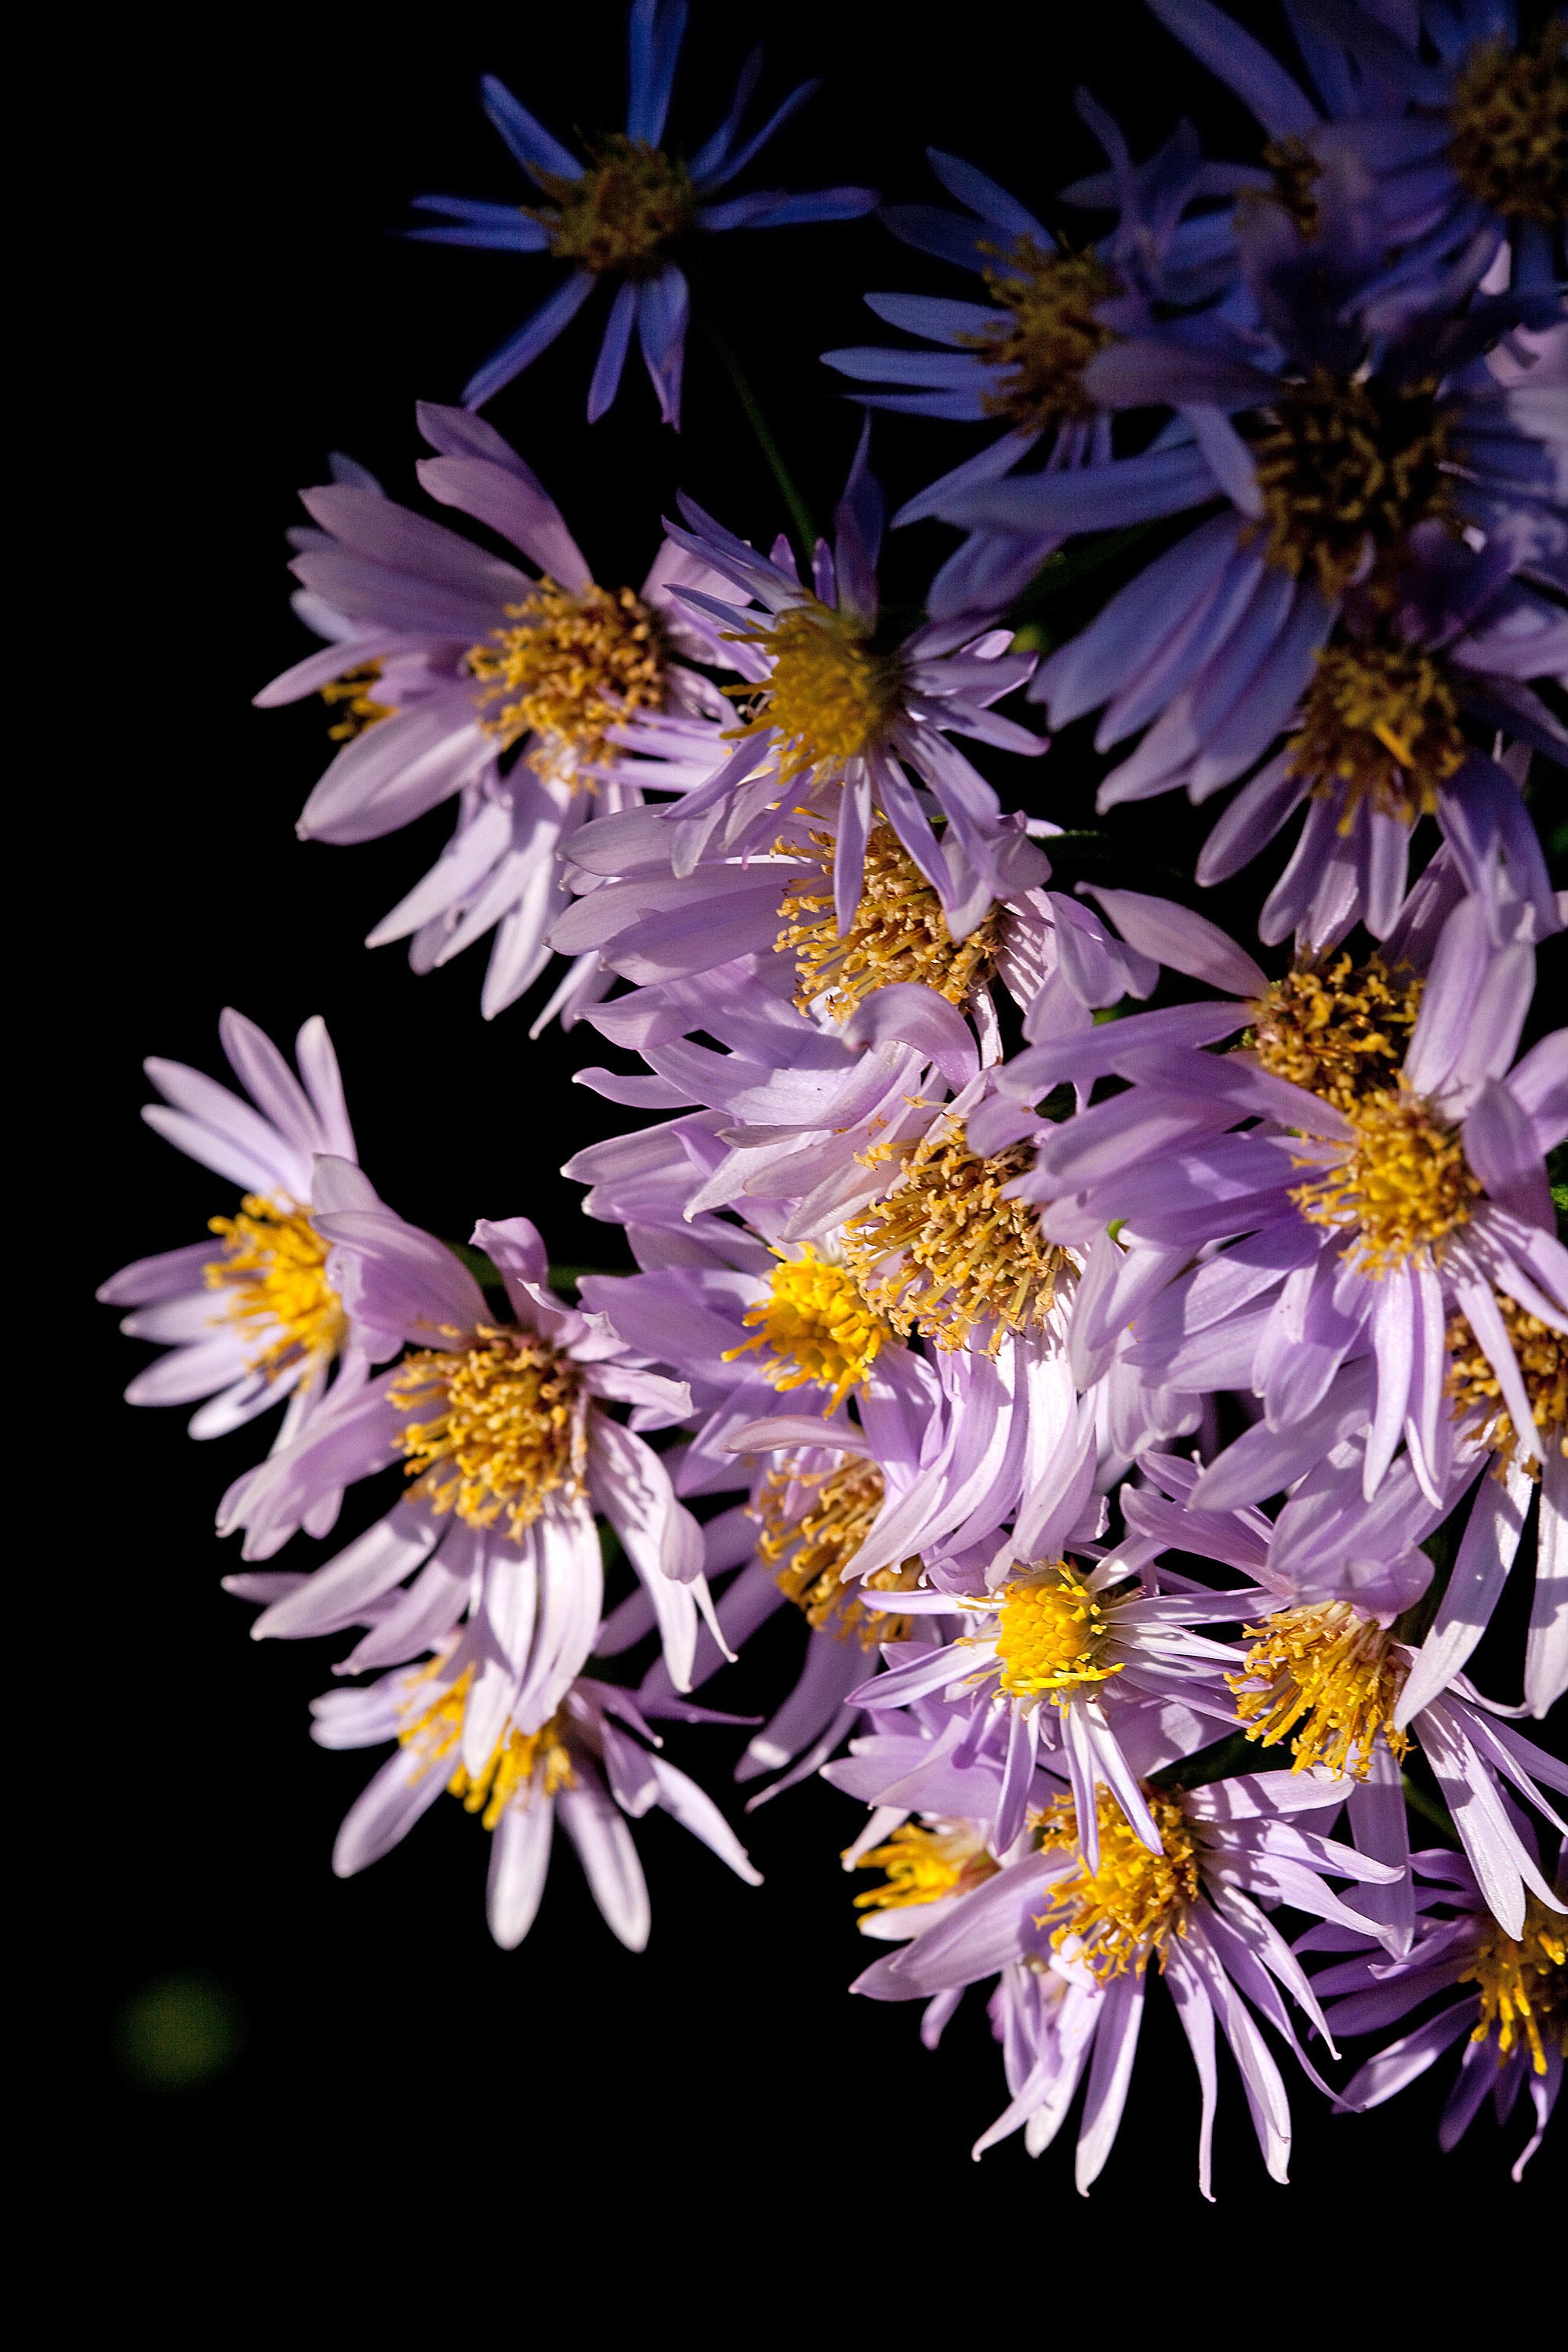   Aster tataricus  is a favorite of bees.  Photo © Cravotta Photography. All rights reserved. 